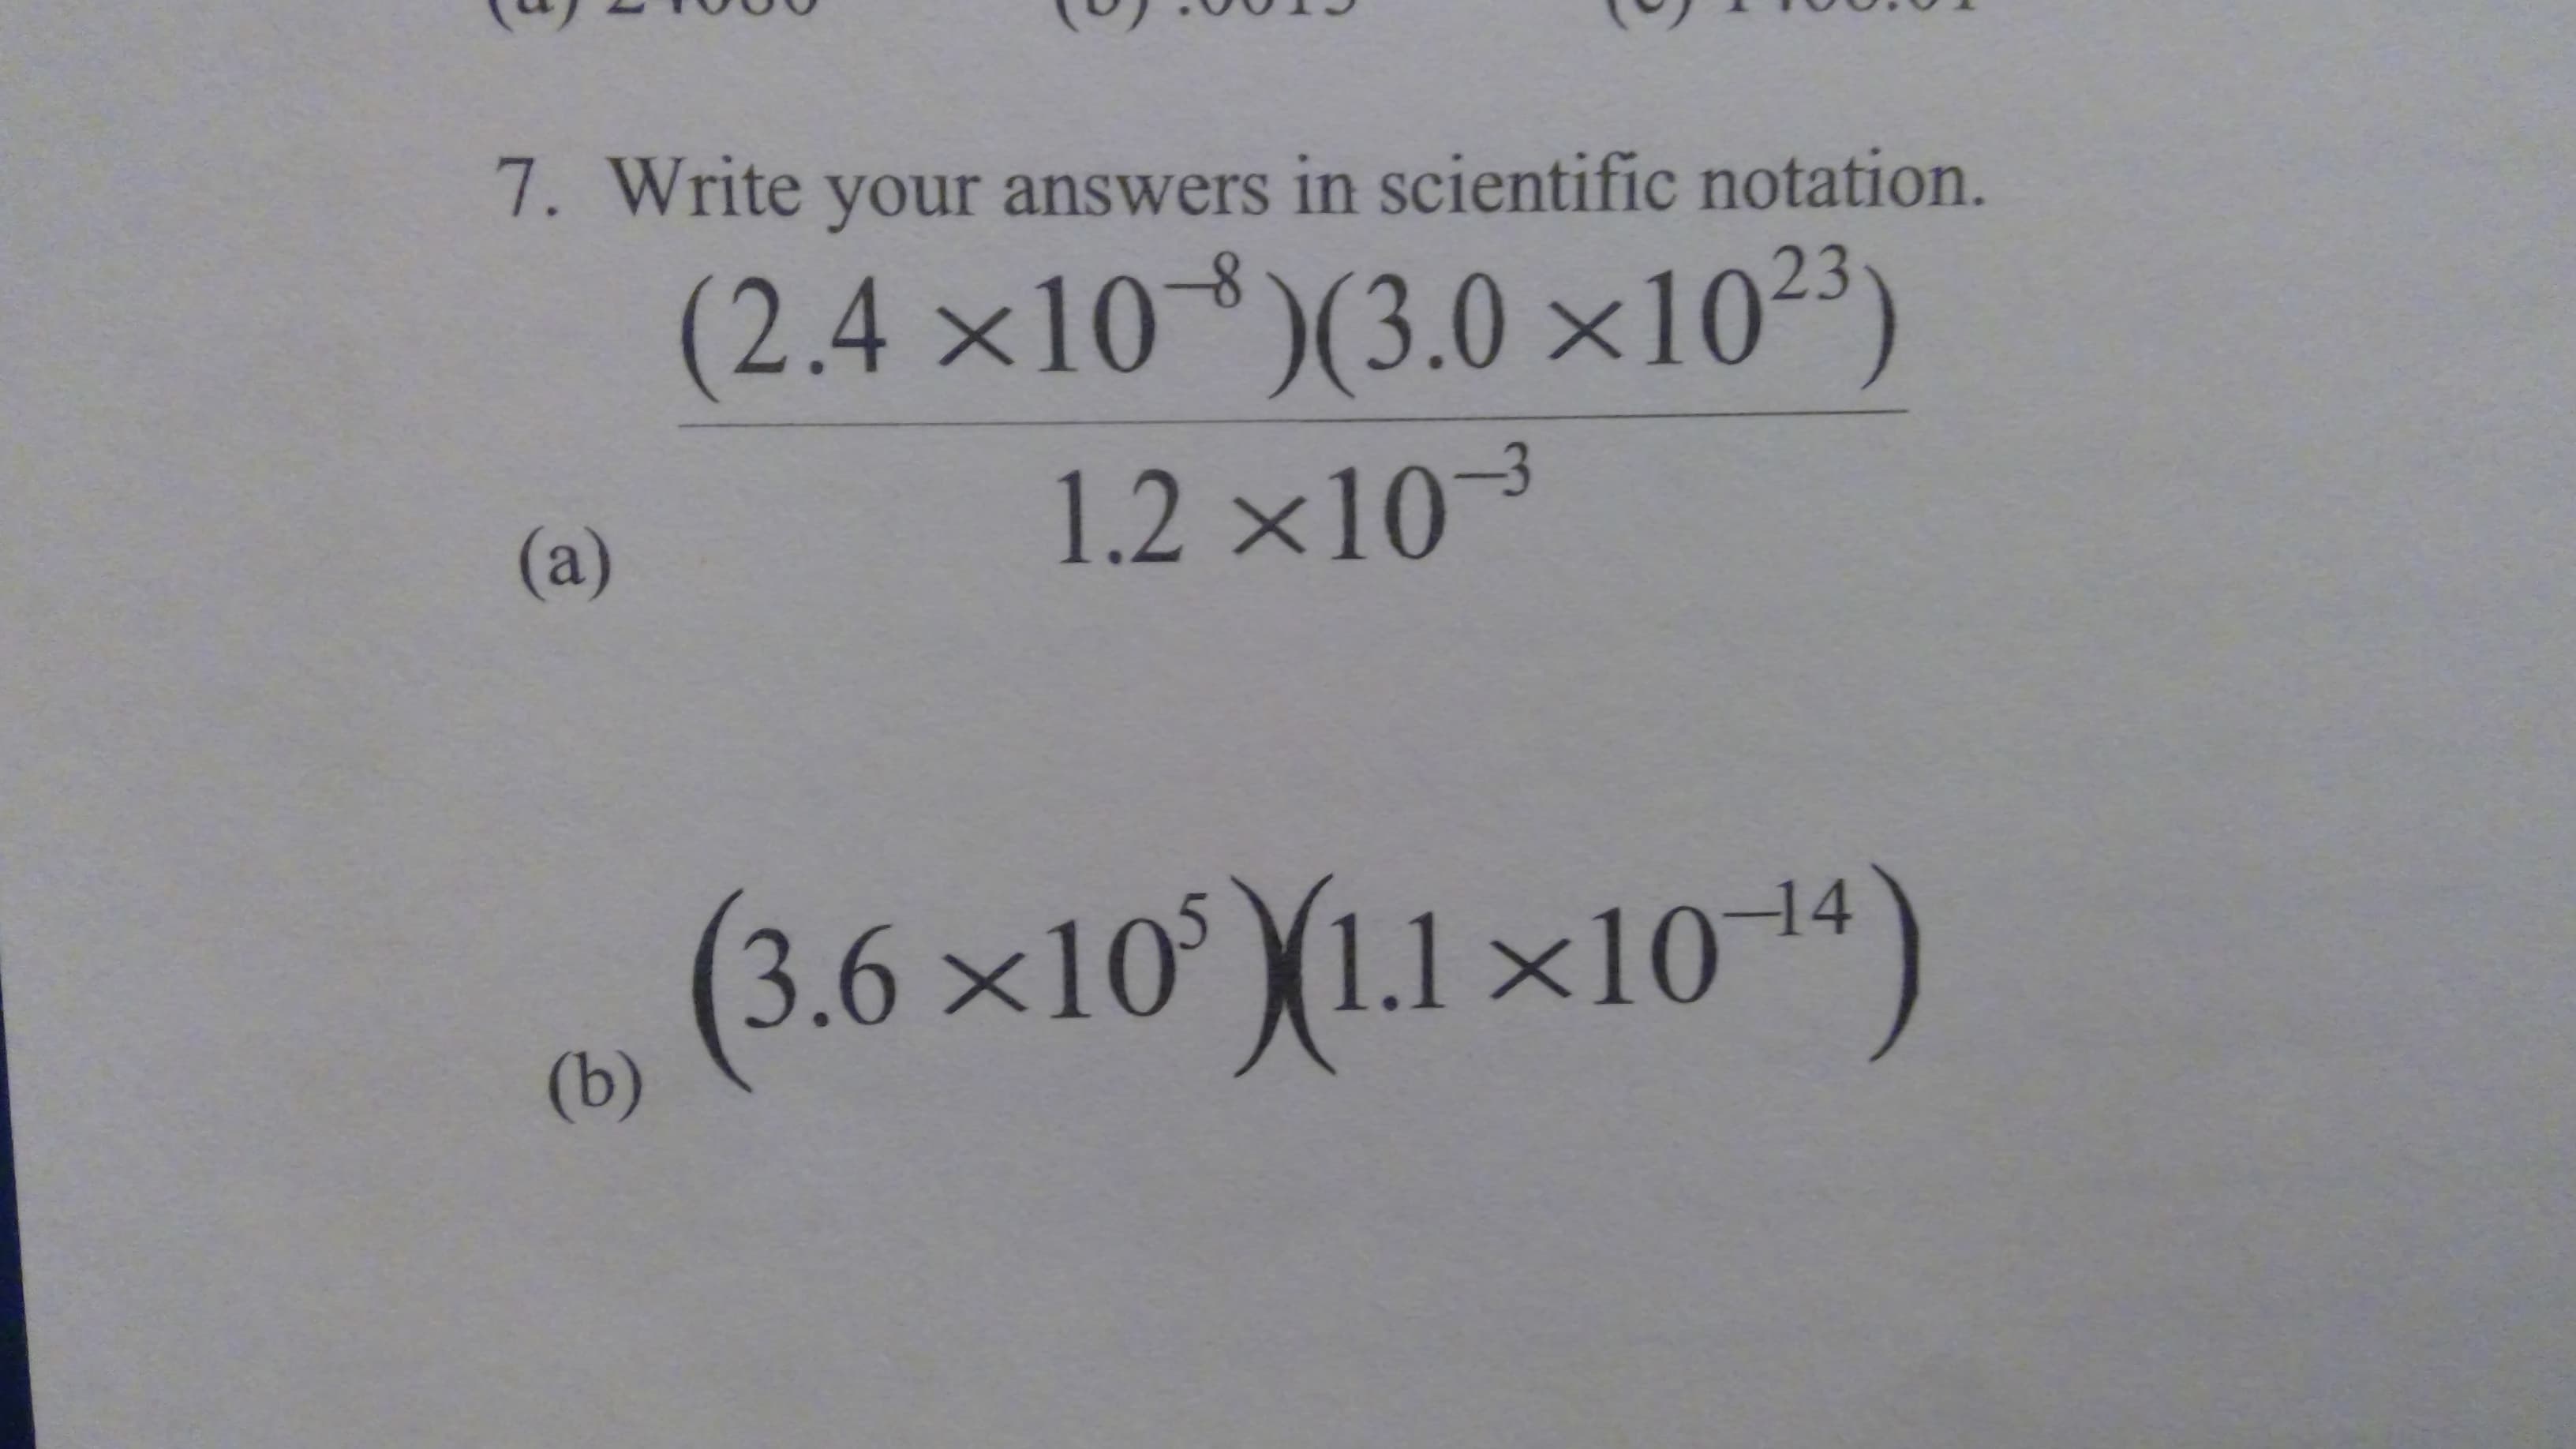 7. Write your answers in scientific notation.
(2.4×10*)3)
(3.0×10²
(a)
1.2 ×103
(3.6 ×10° (1.1 ×10 ")
(b)
